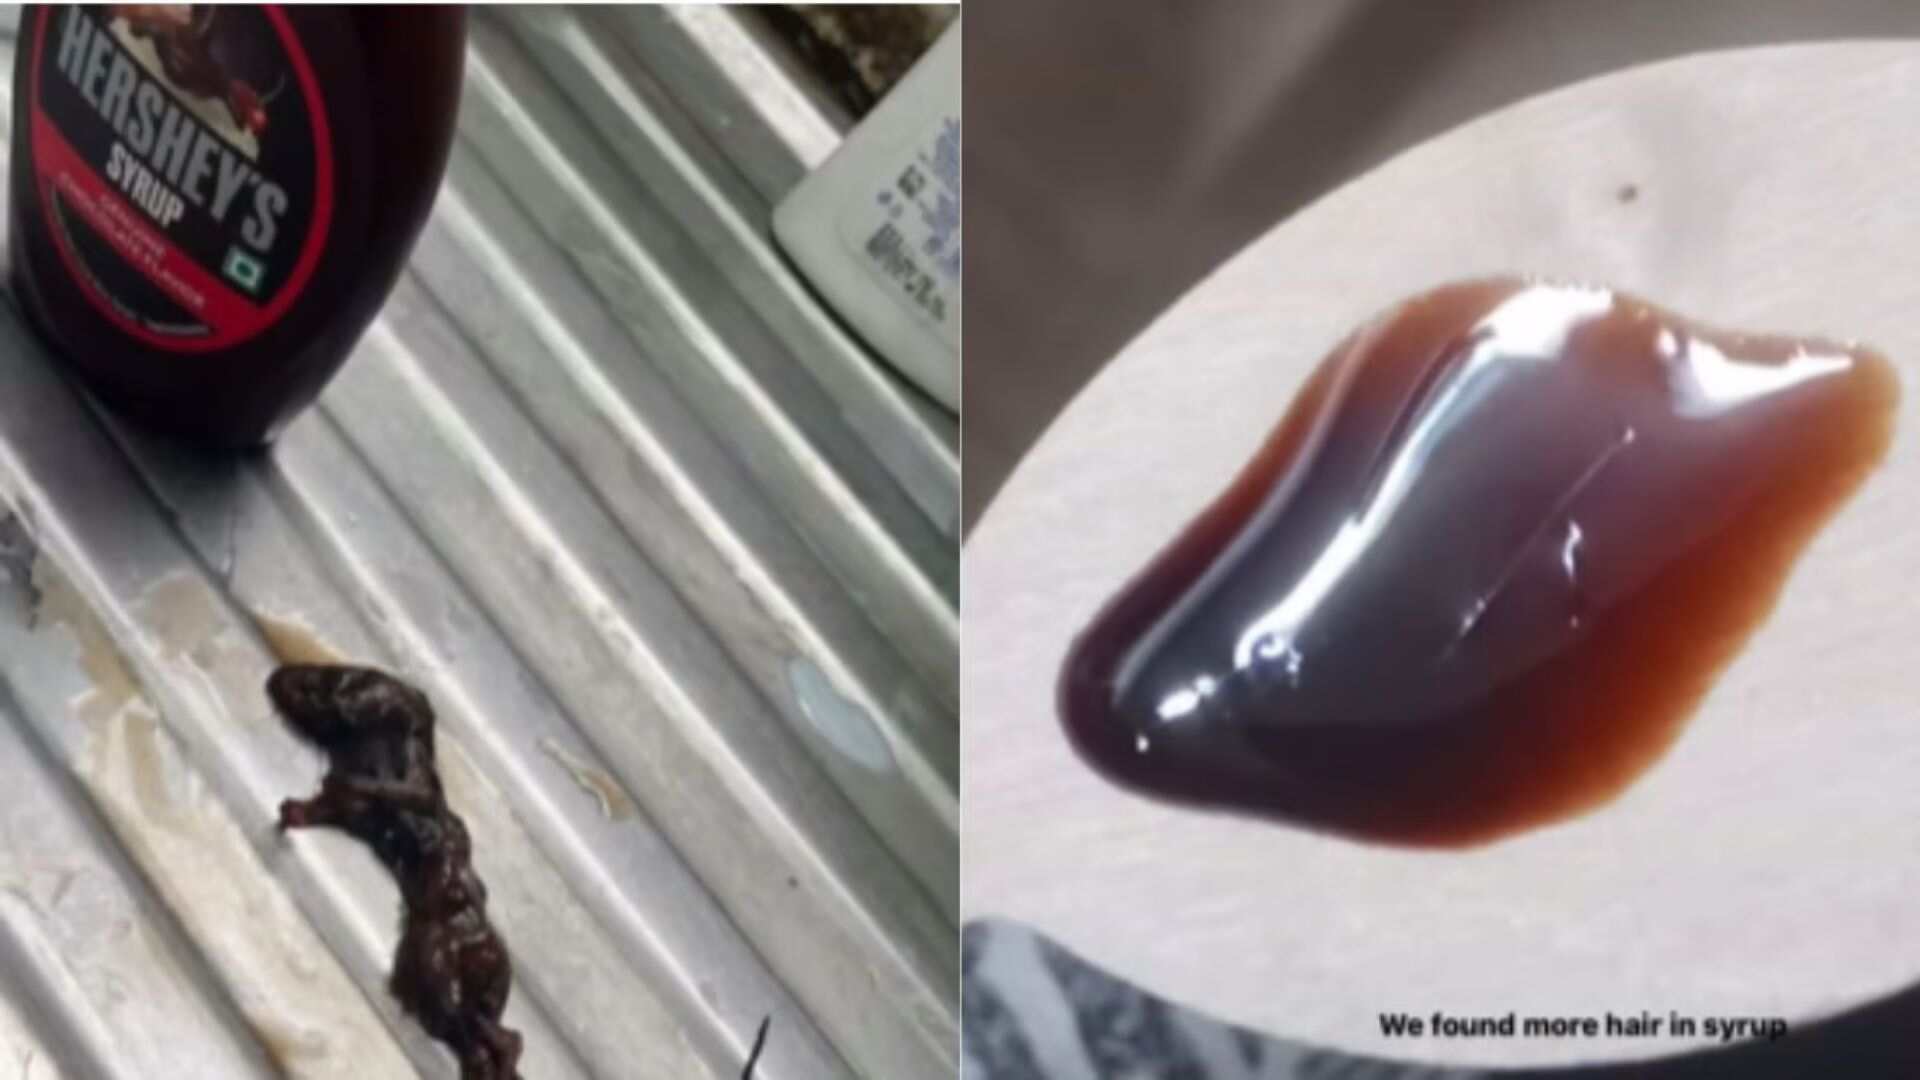 Viral: Dead Mouse Found Inside Hershey’s Syrup